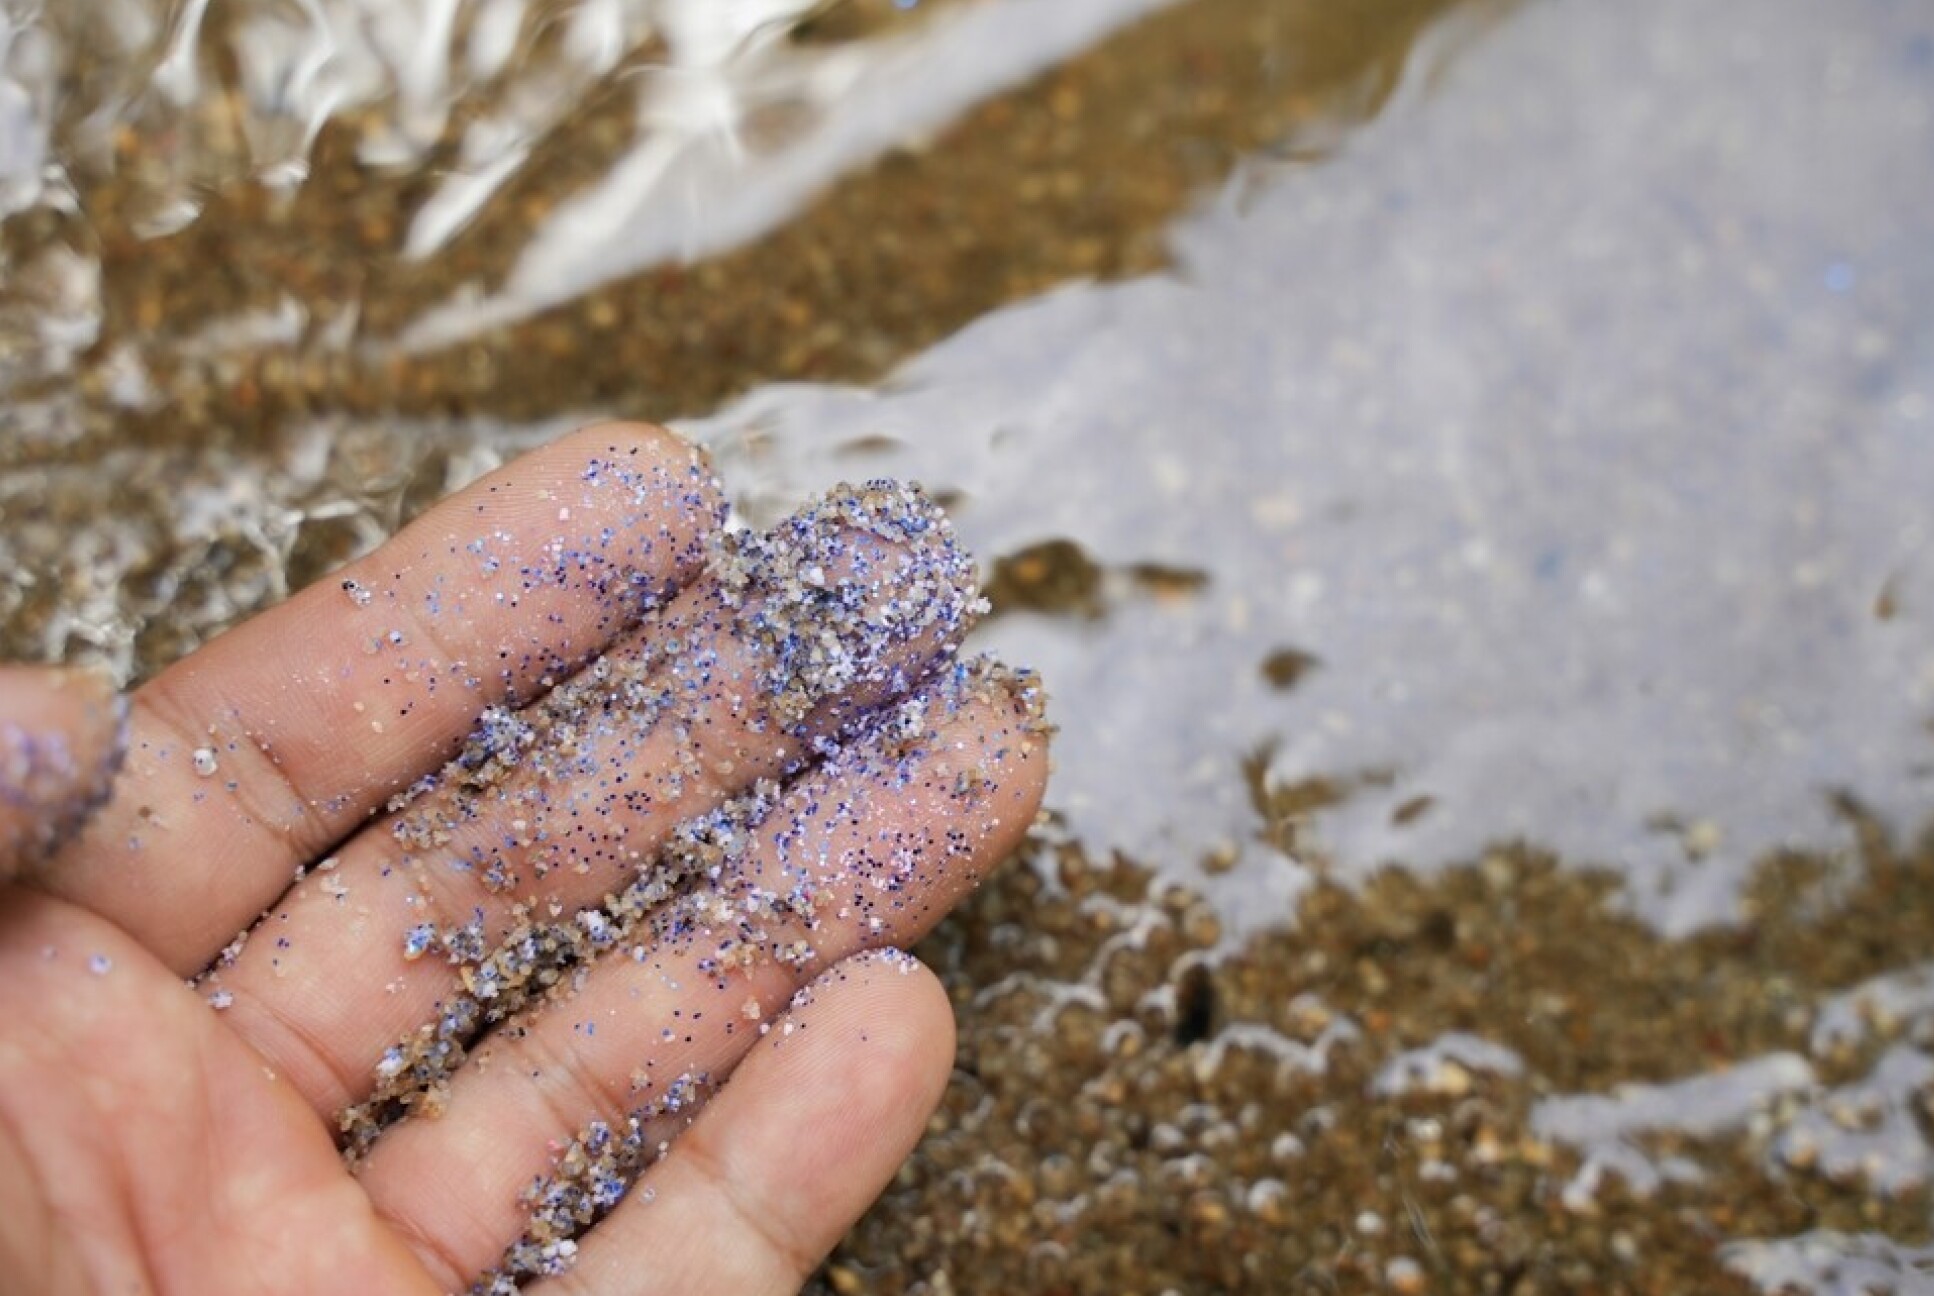 Fingers smeared in microplastics with a beach and ocean in the background